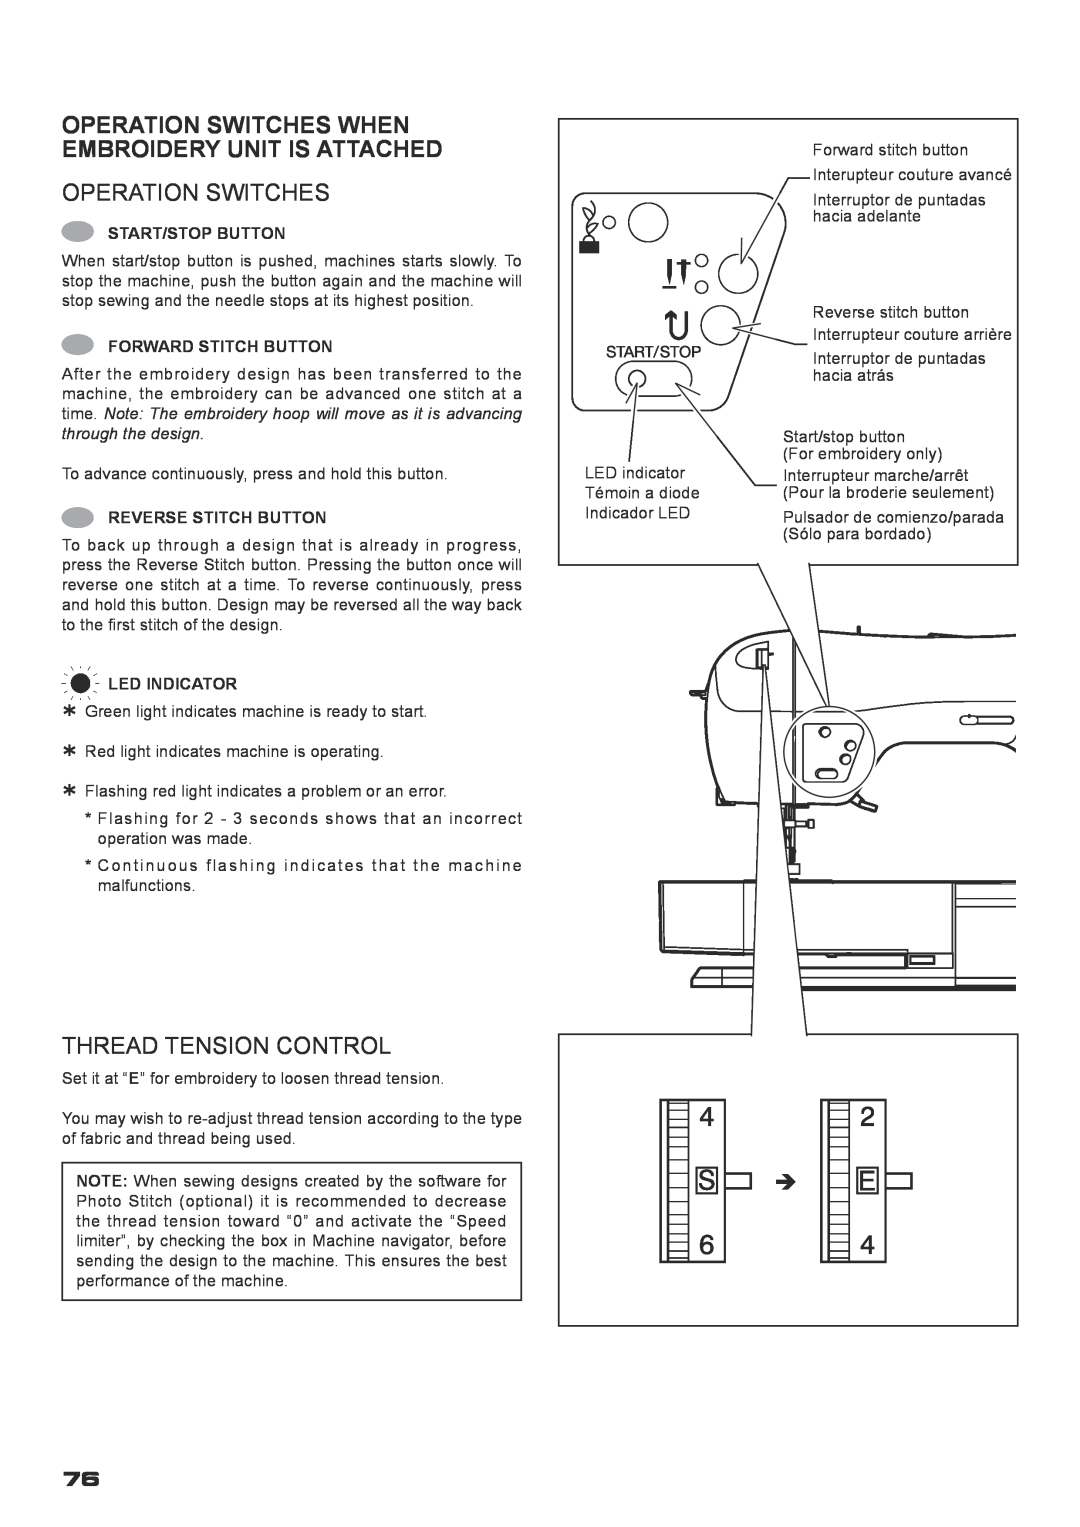 Singer XL-400 instruction manual Operation Switches When Embroidery Unit Is Attached, Thread Tension Control 